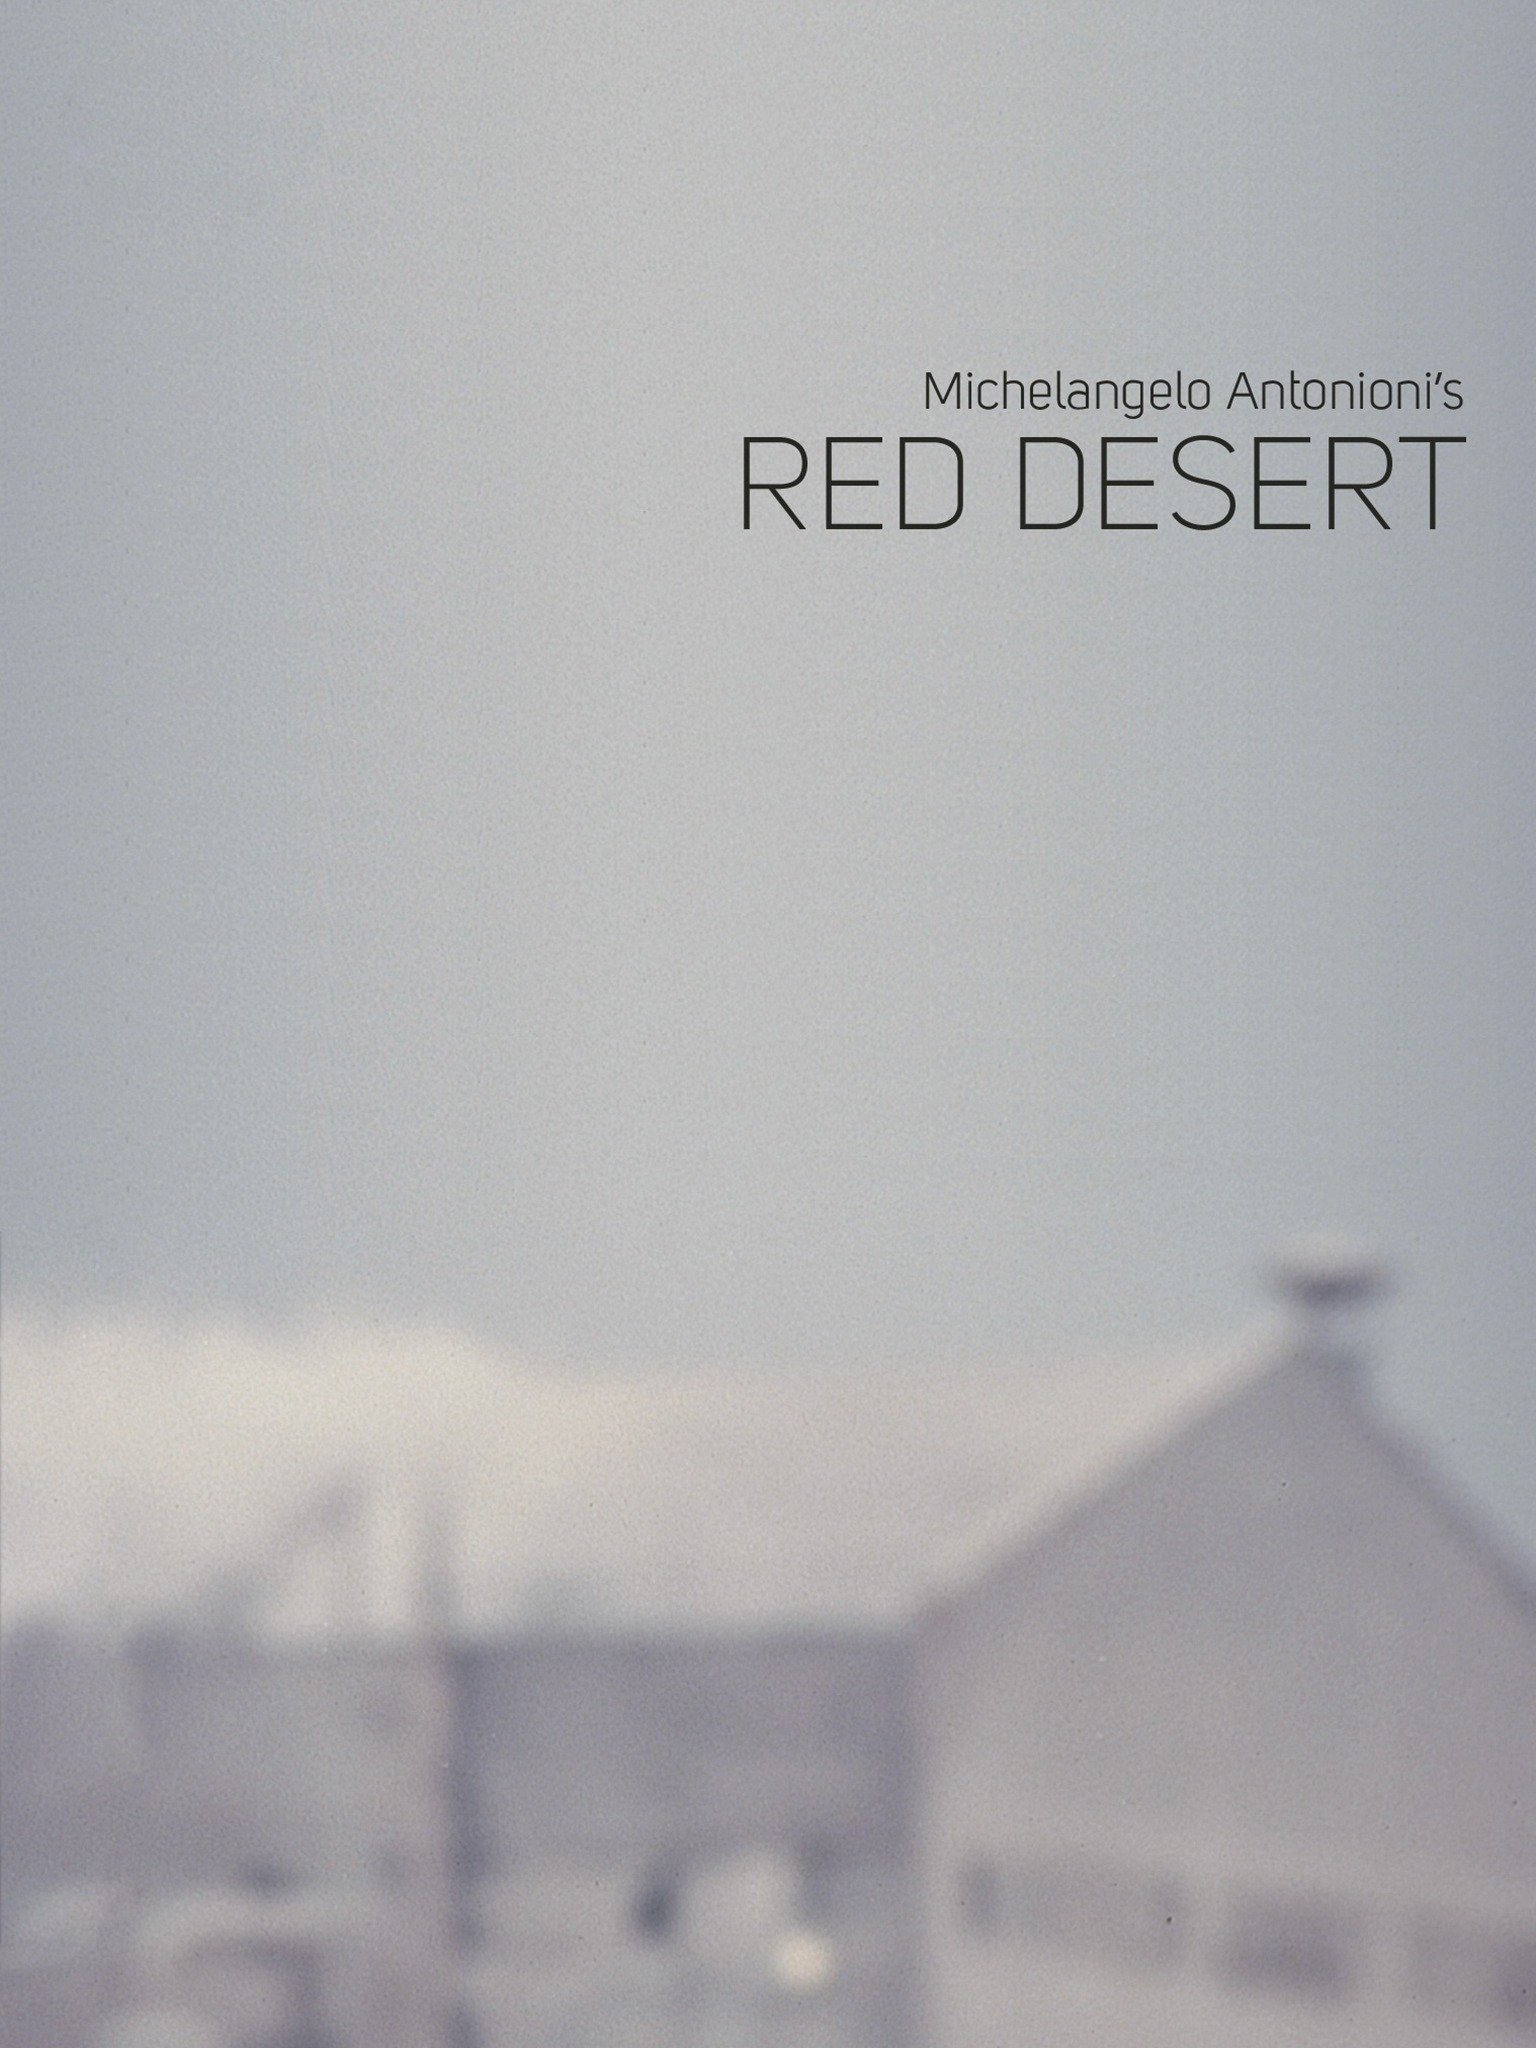 red desert movie review